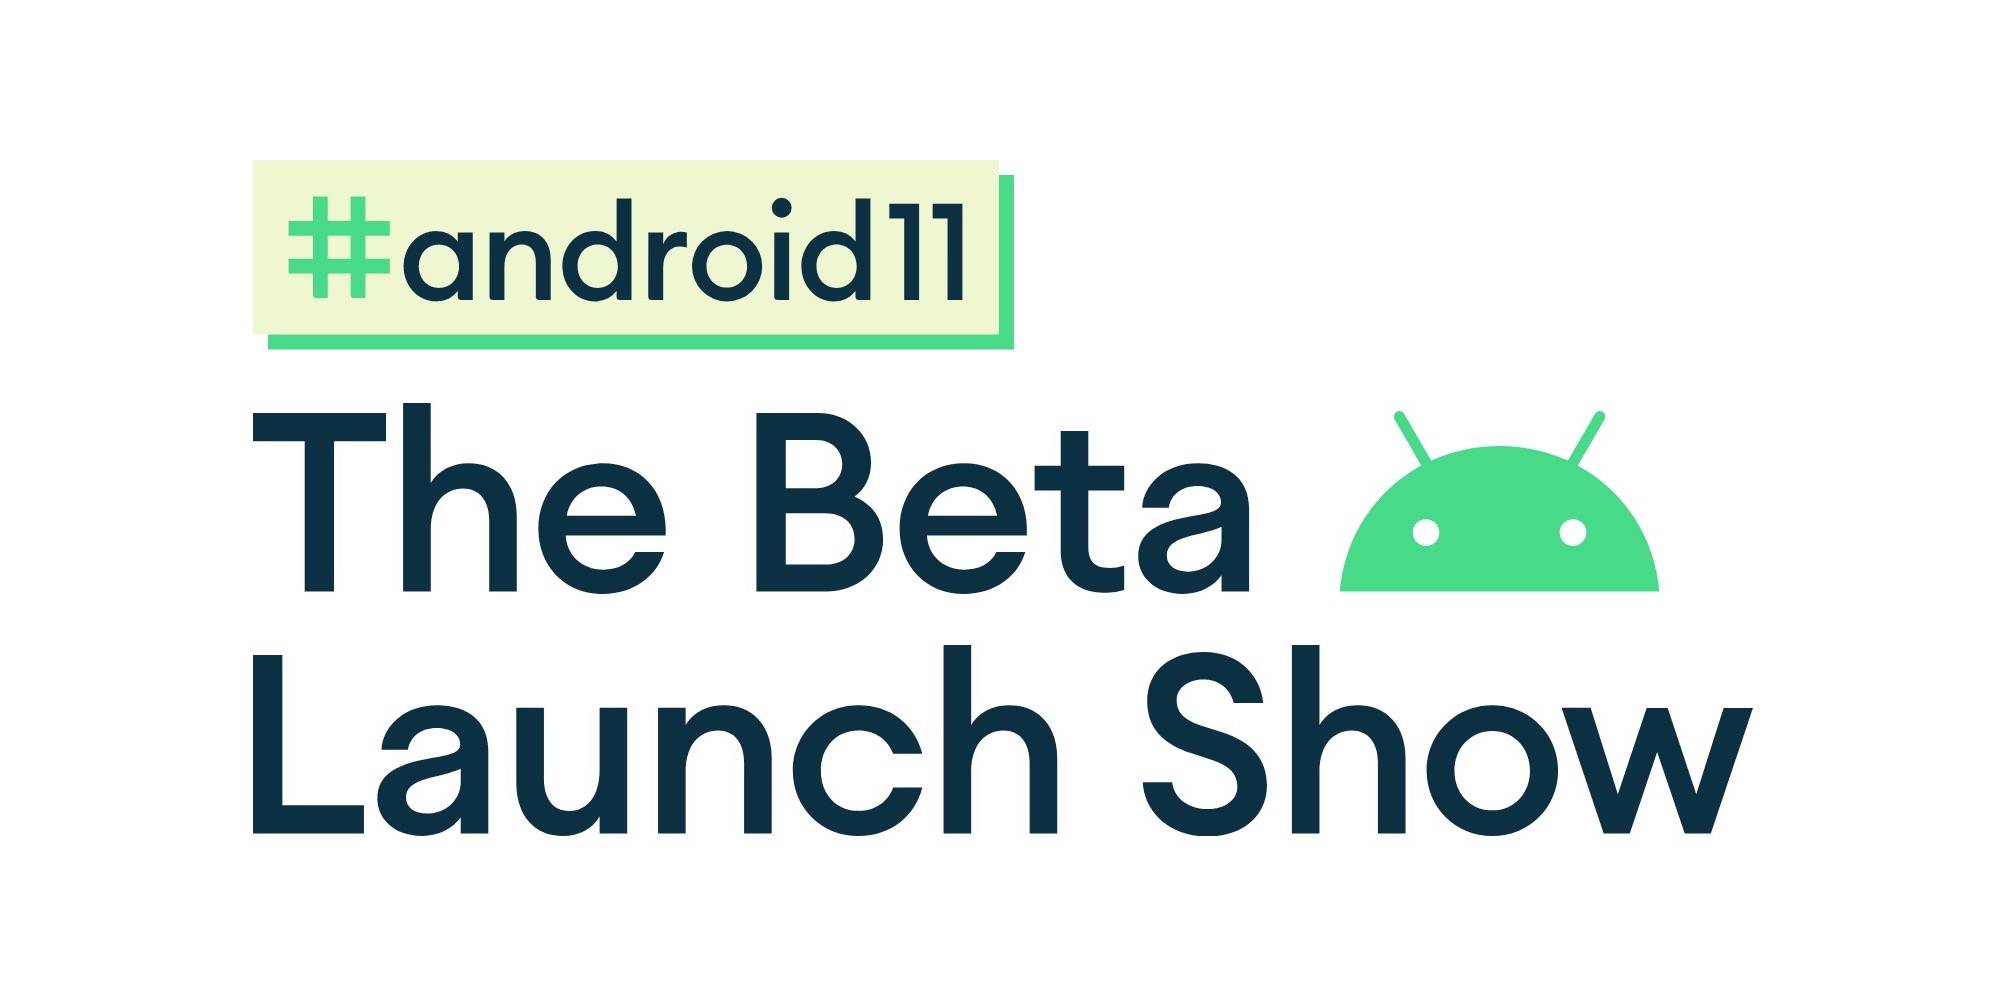 Google delays next week’s Android 11 Beta release and virtual launch event thumbnail